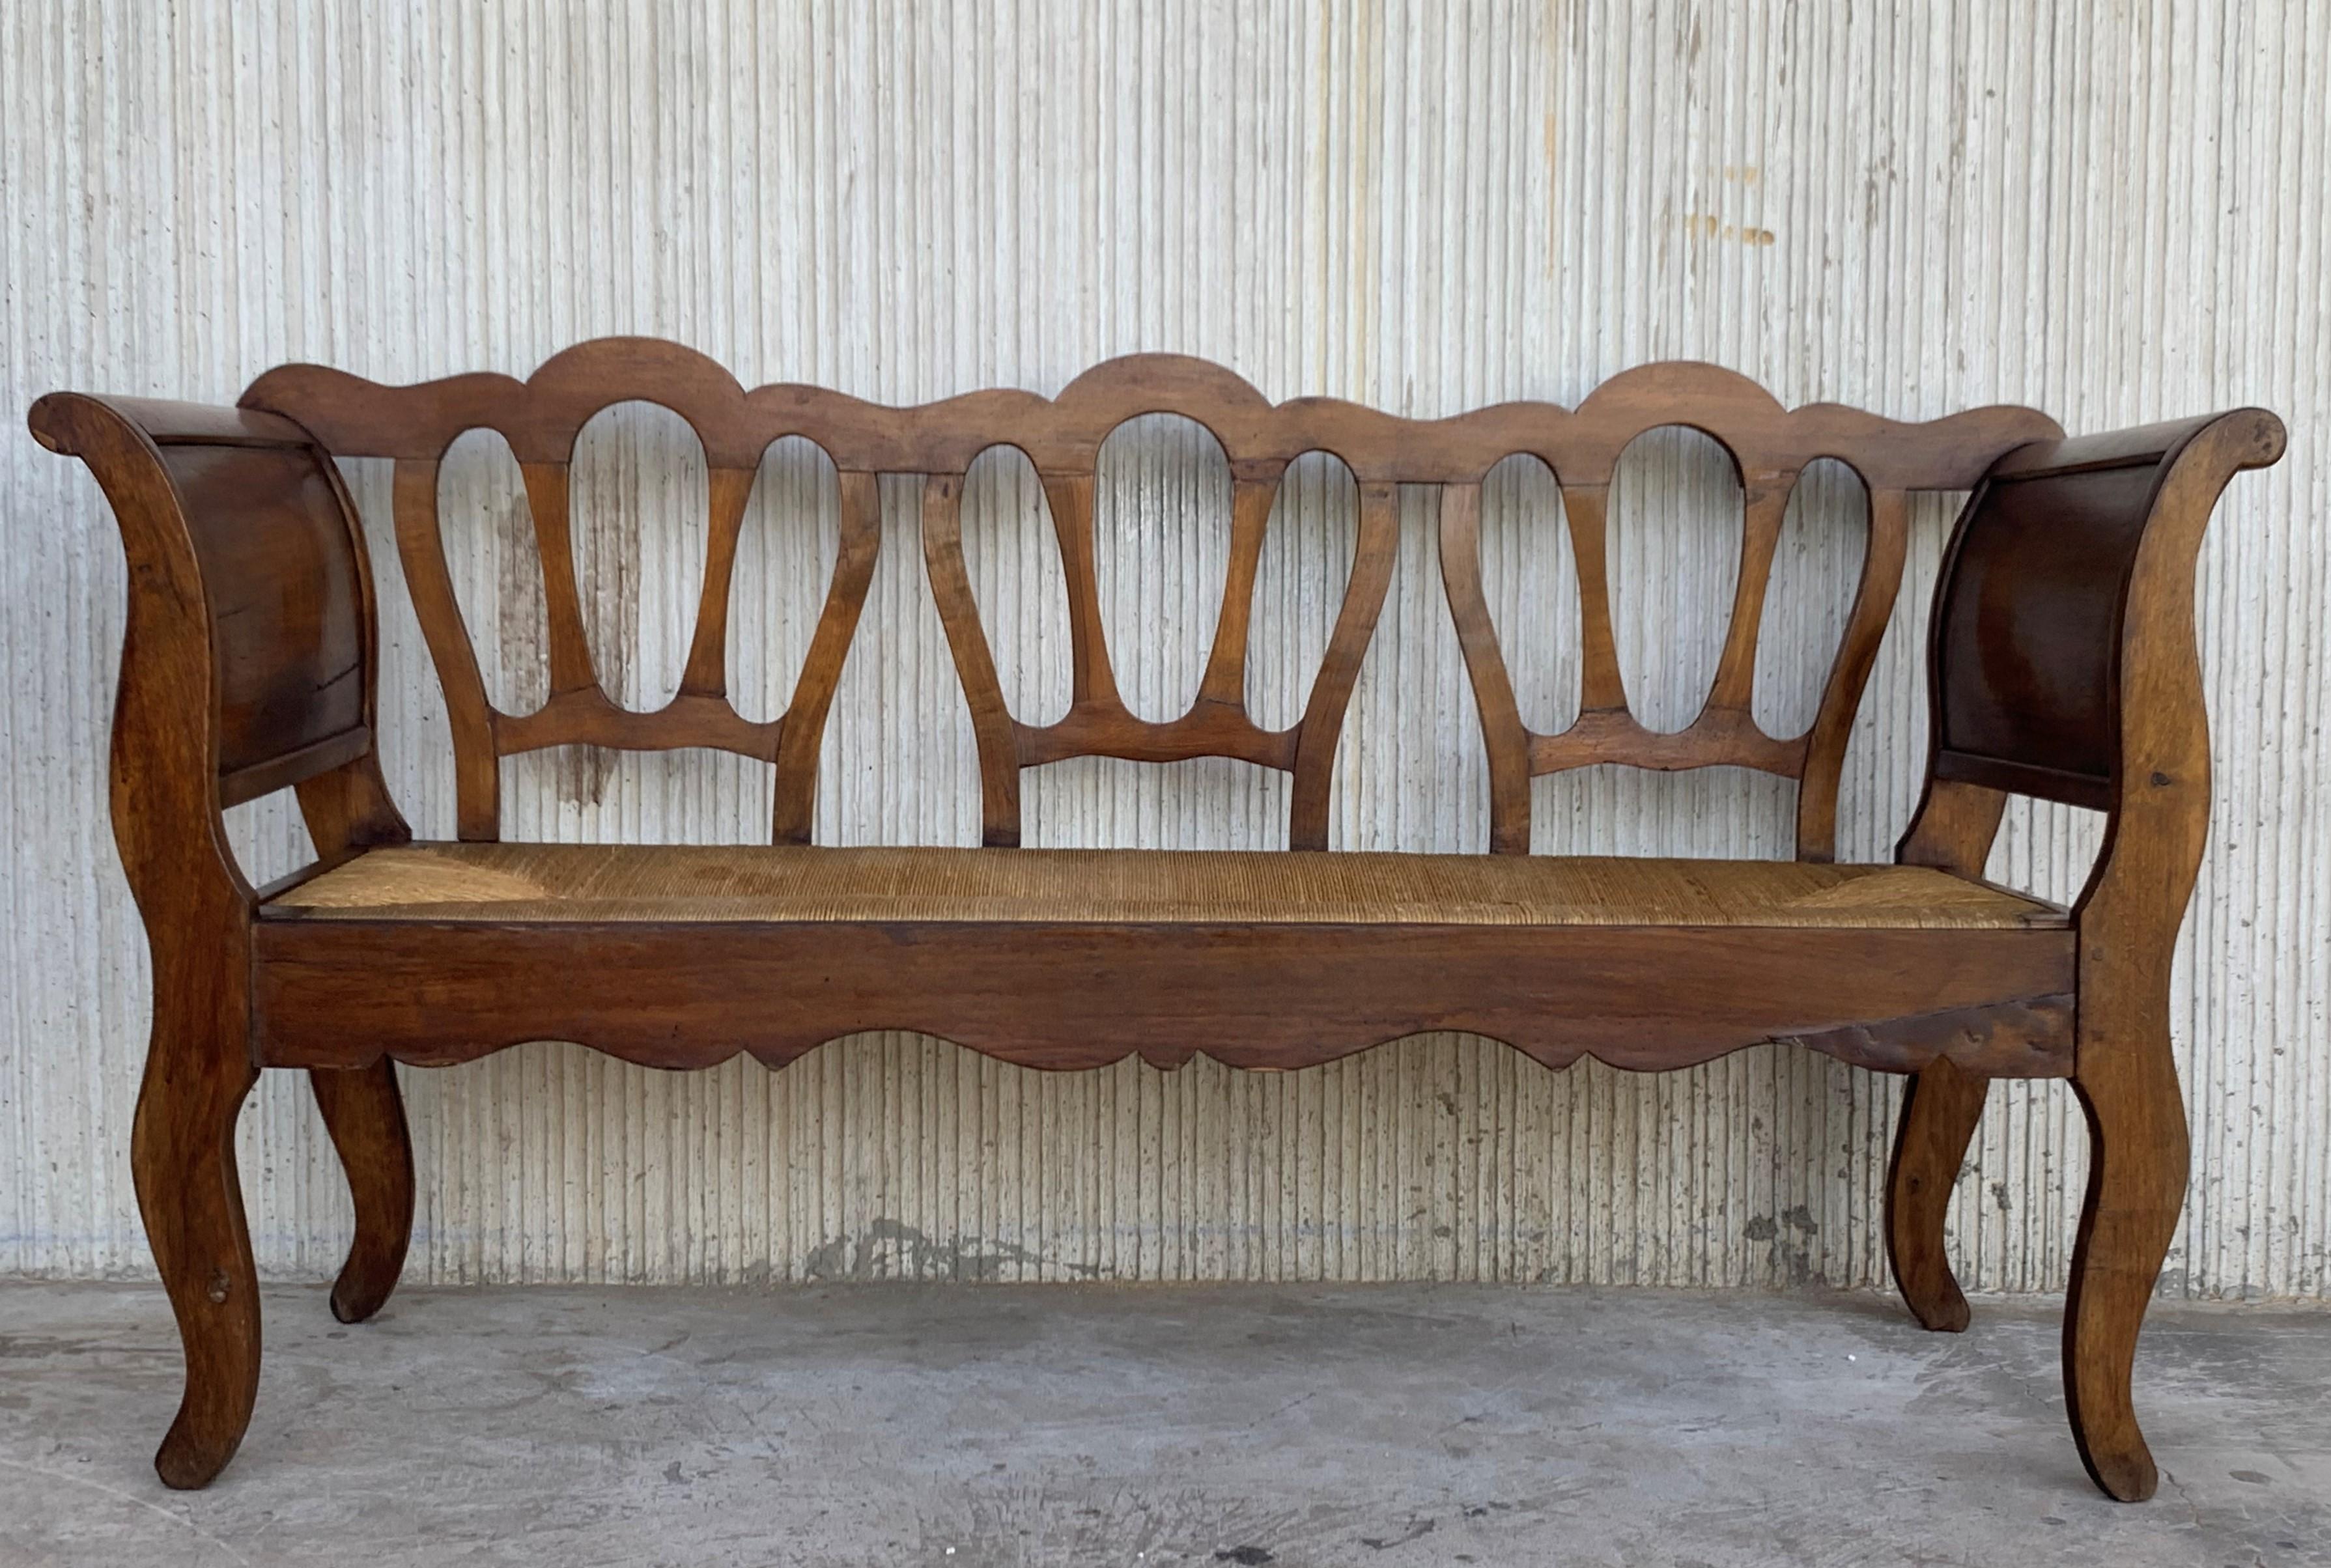 Antique 19th century English Victorian bench.
Listing features cabriole legs, caned seats, balloon backs, solid wood construction, beautiful wood grain, very nice antique item, circa 19th century.

Bench dimensions: H 33.26in, W 62.2in, D